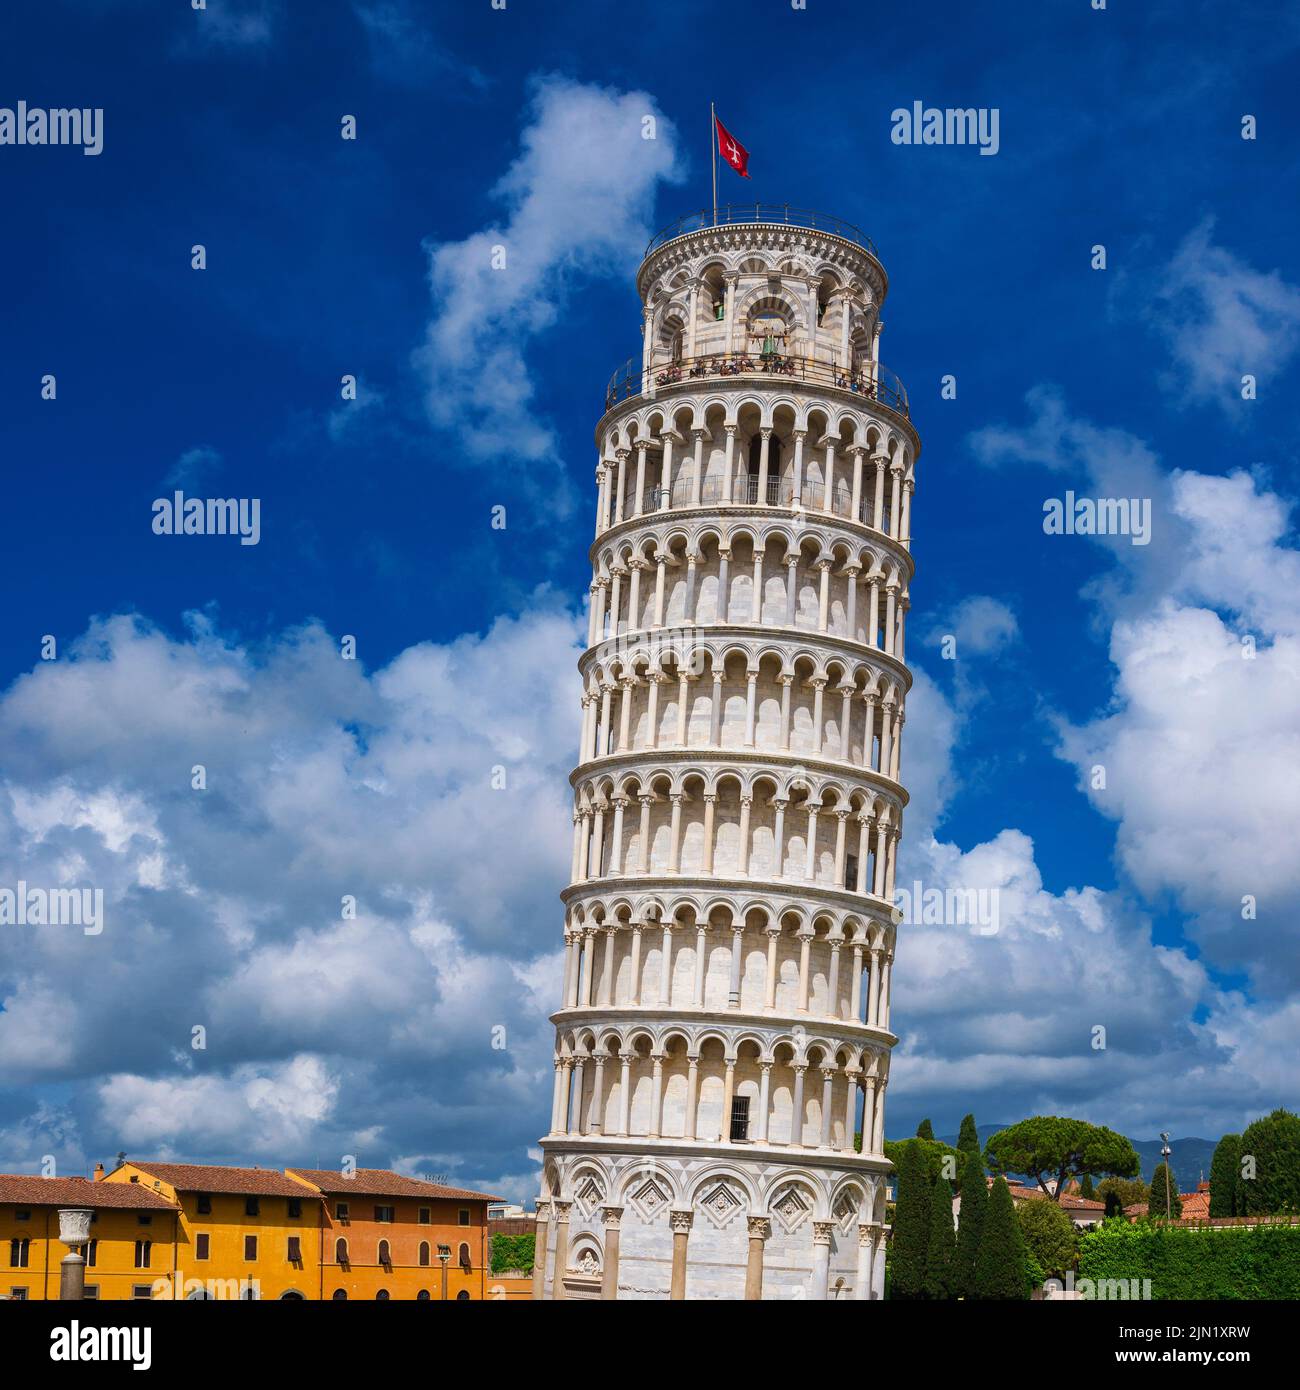 The iconic Leaning Tower of Pisa, one of the most famous ancient building in the world Stock Photo